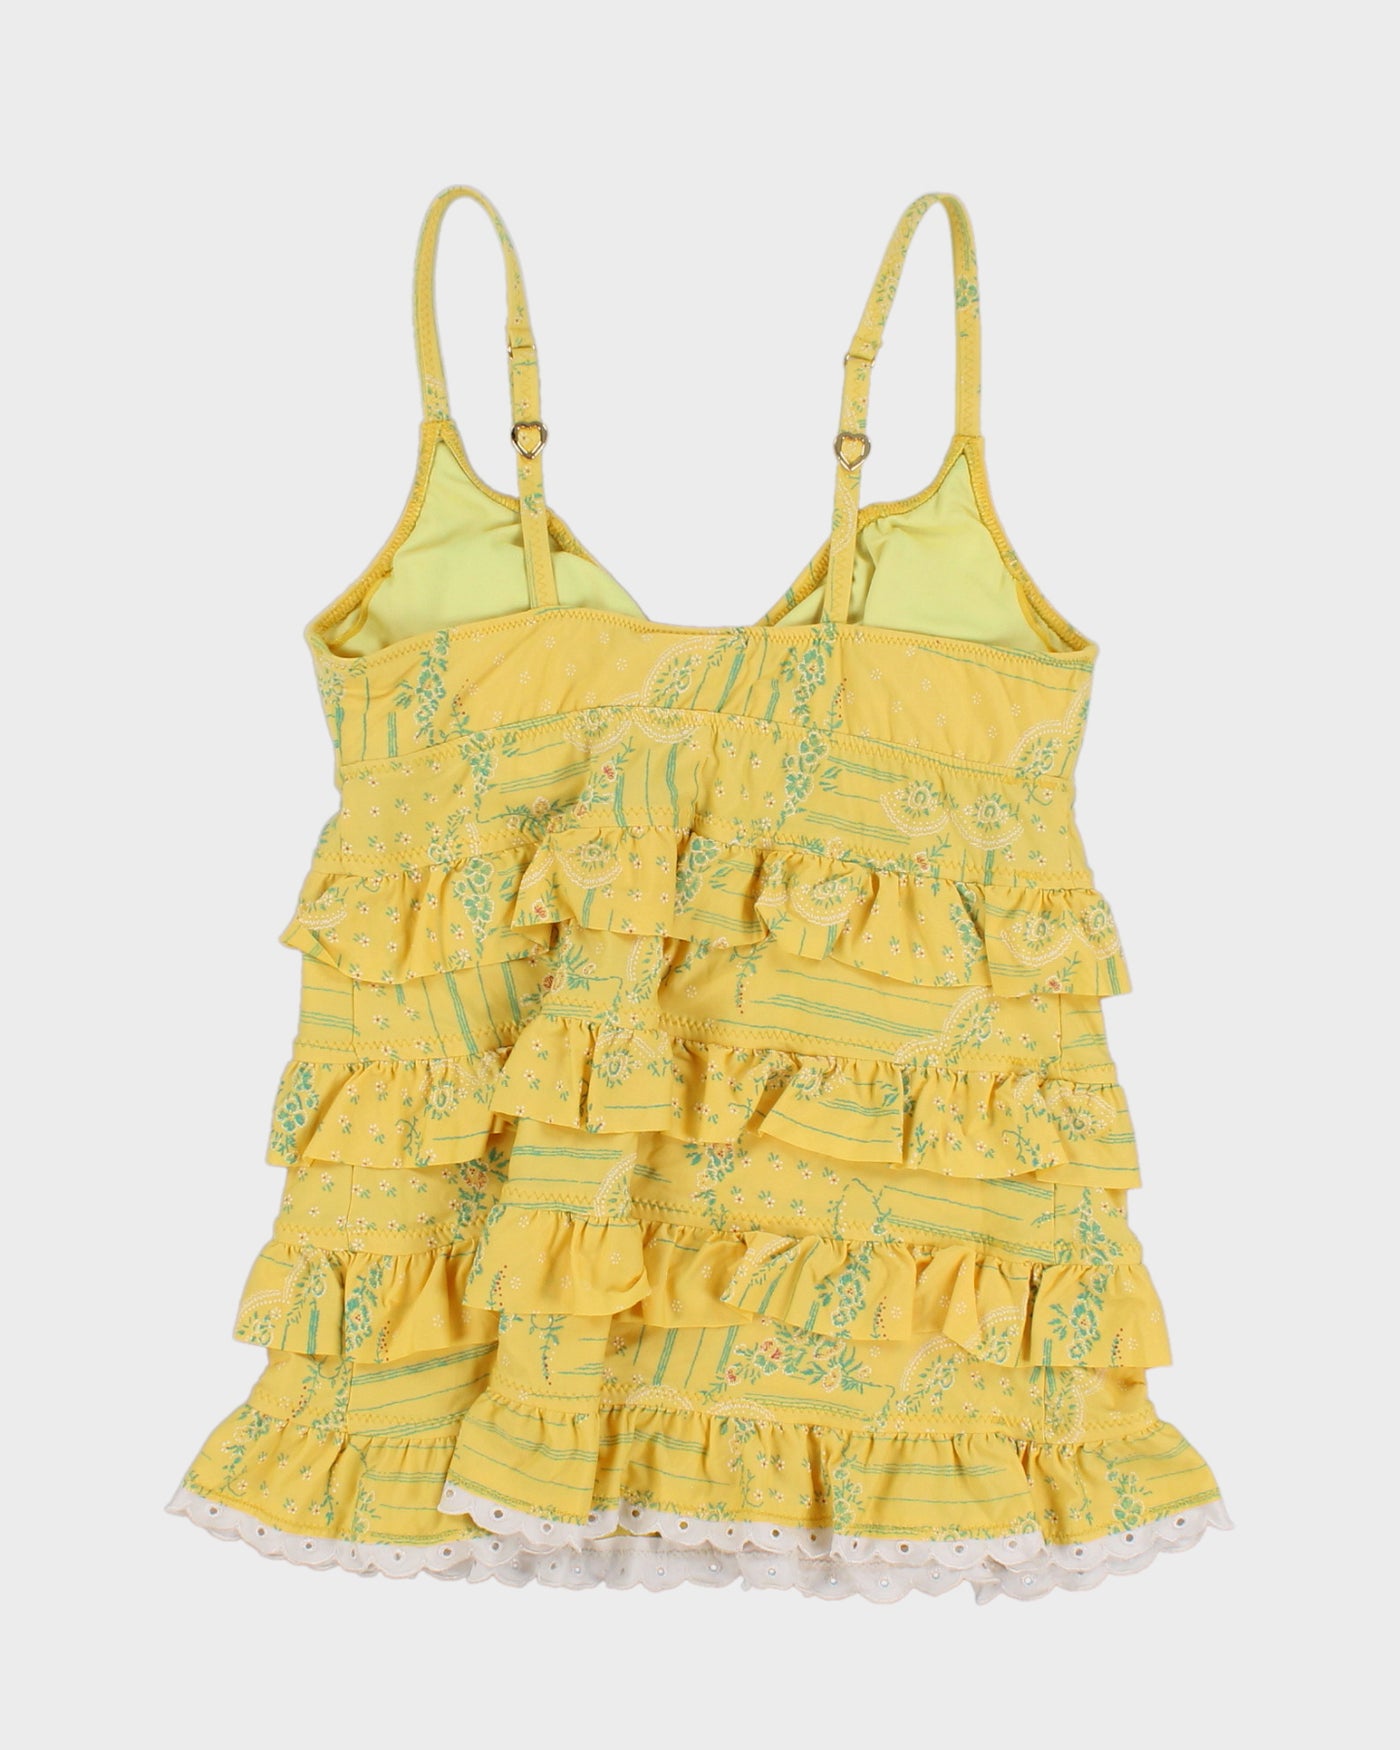 Betsey Johnson Floral Yellow Swimming Top - M